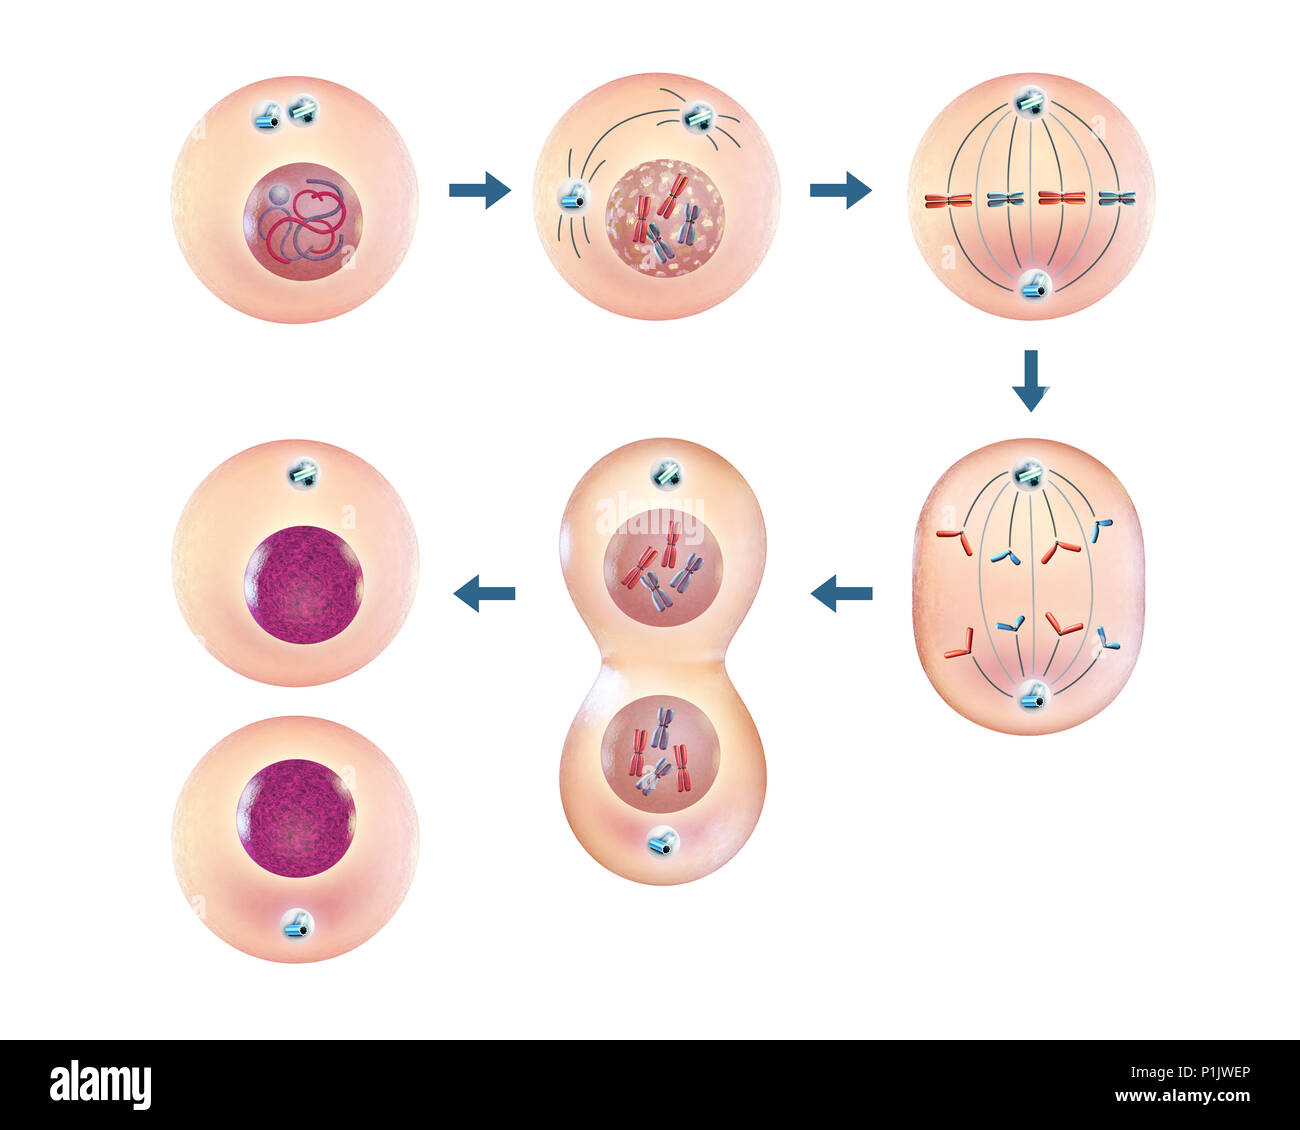 Various steps of cellular division. 3D illustration. Stock Photo